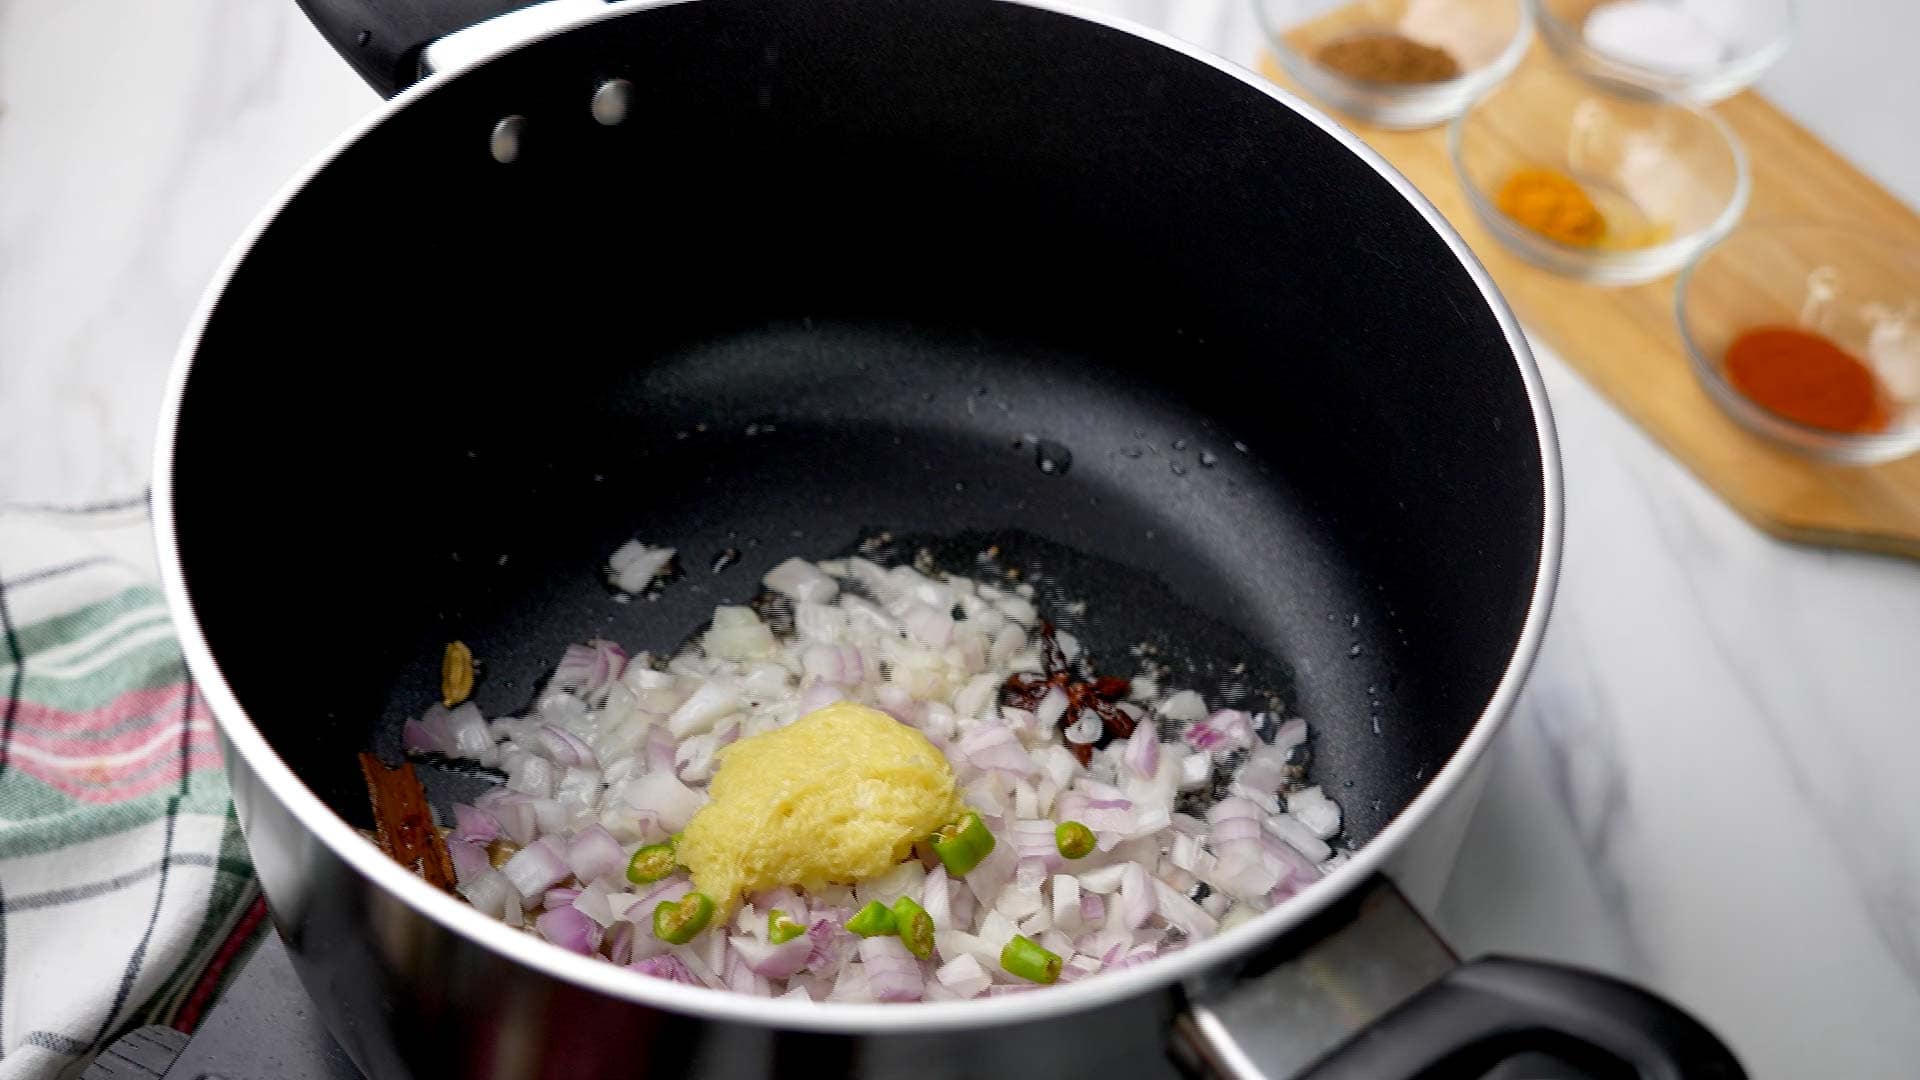 Add finely chopped onions, green chilies, and ginger garlic paste. Sauté until onions turn translucent.
